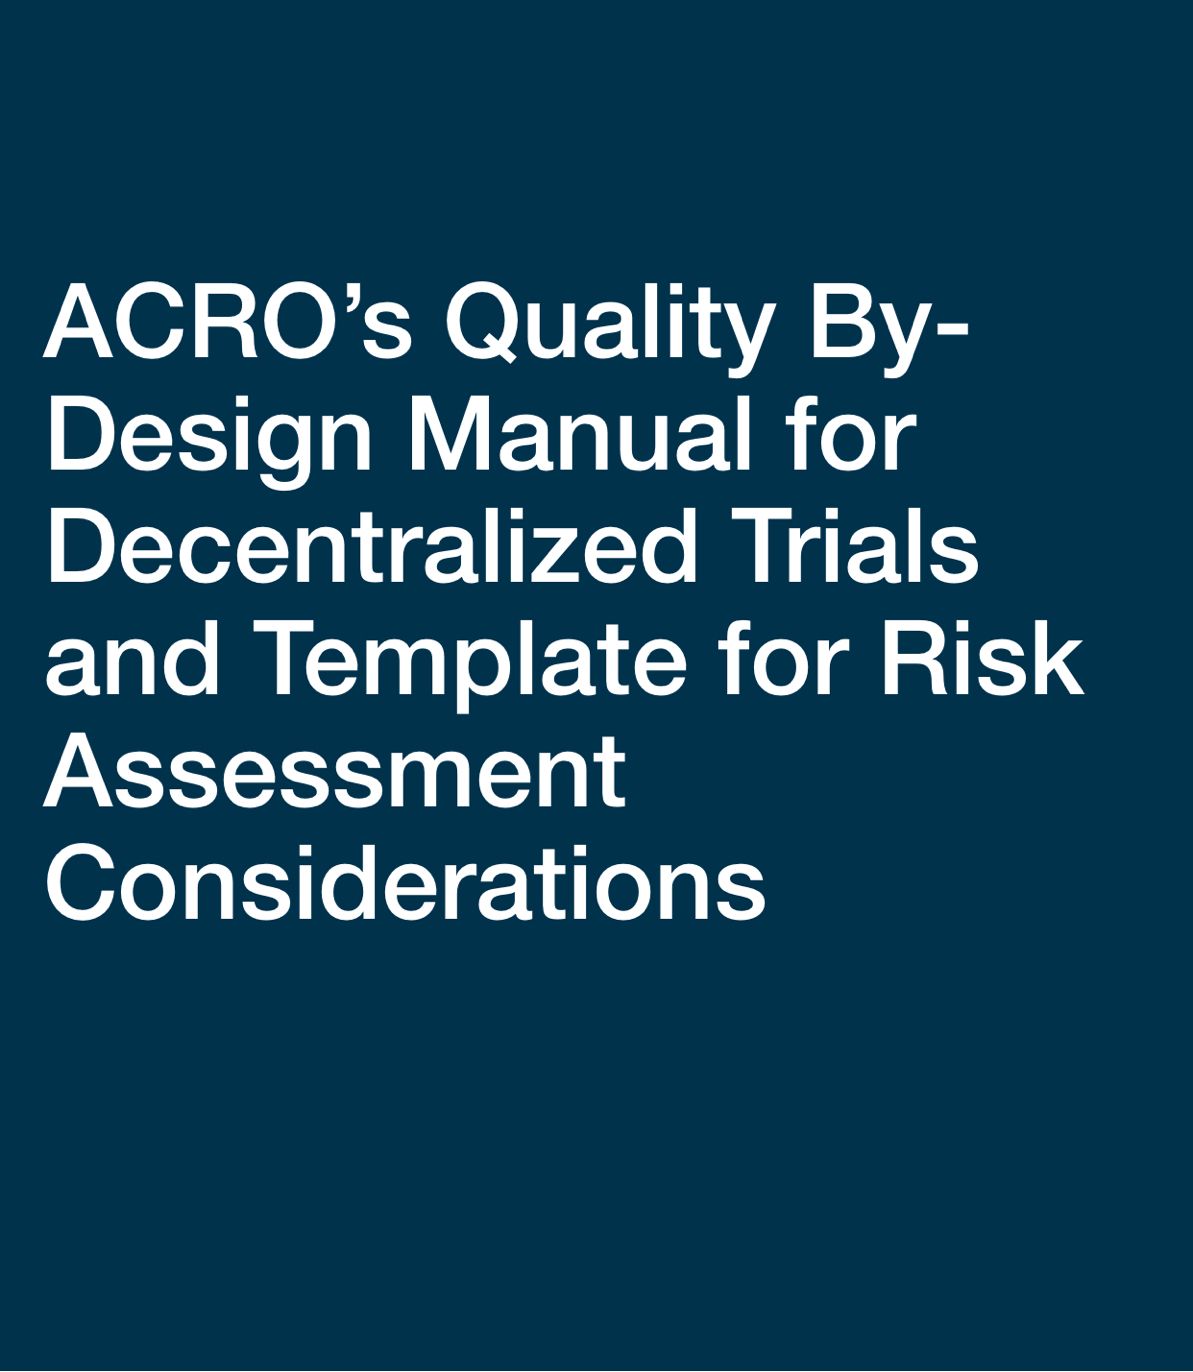 Quality by Design Manual for Decentralised Clinical Trials